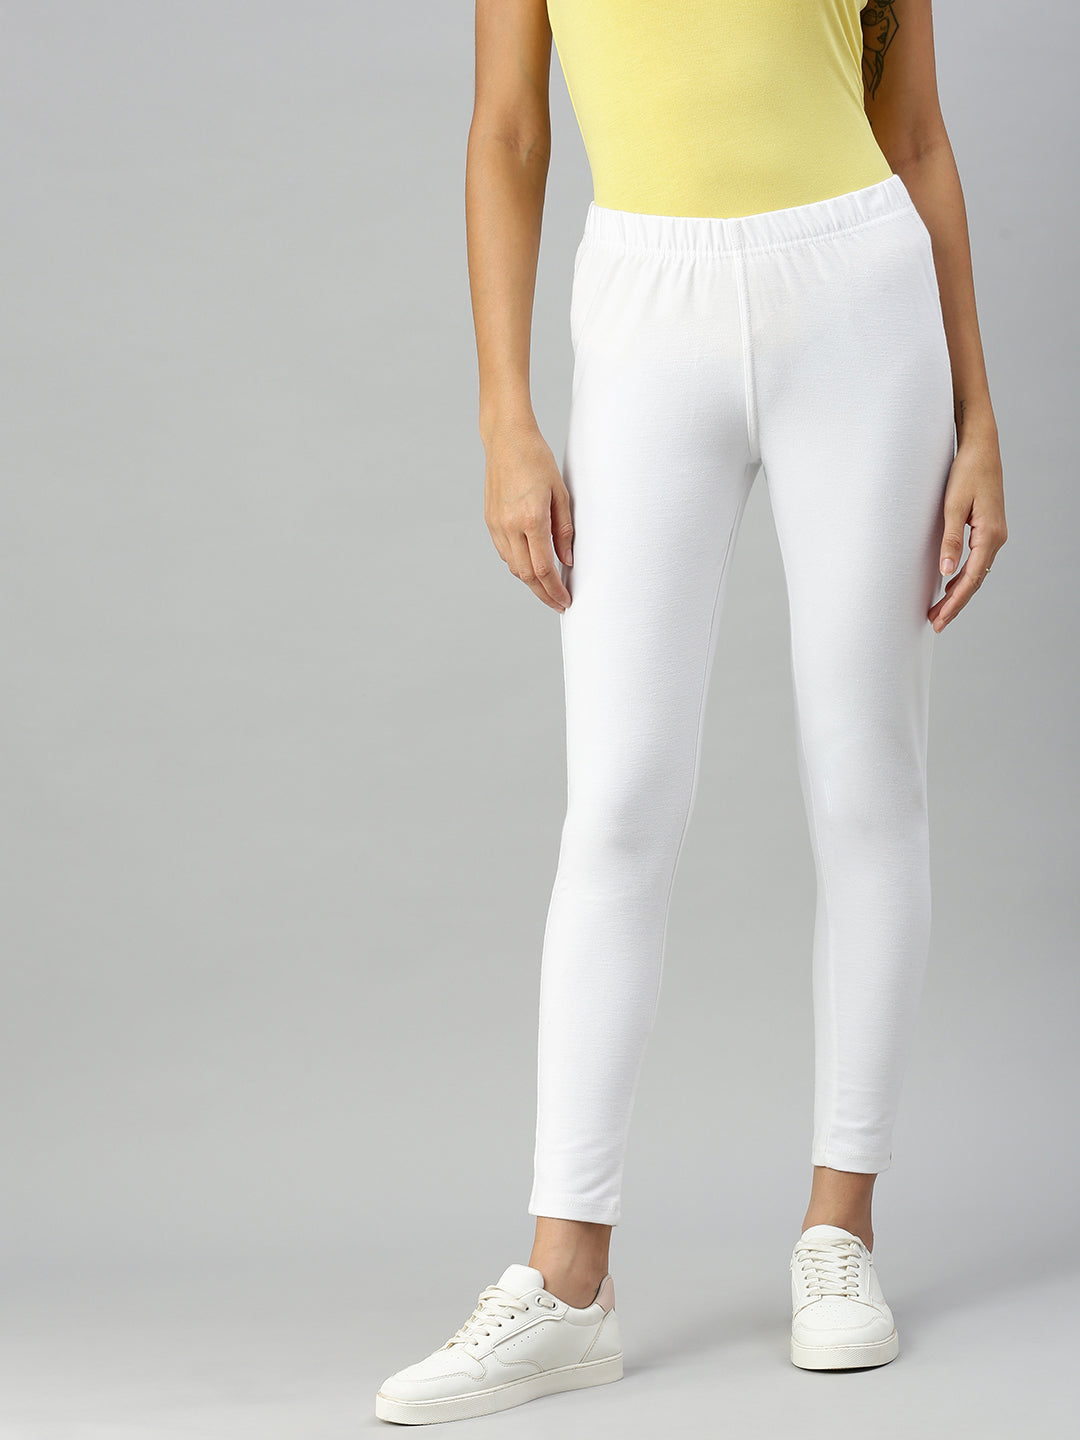 Buy PREEGO Women Royal Blue & White Solid jeggings Online at Best